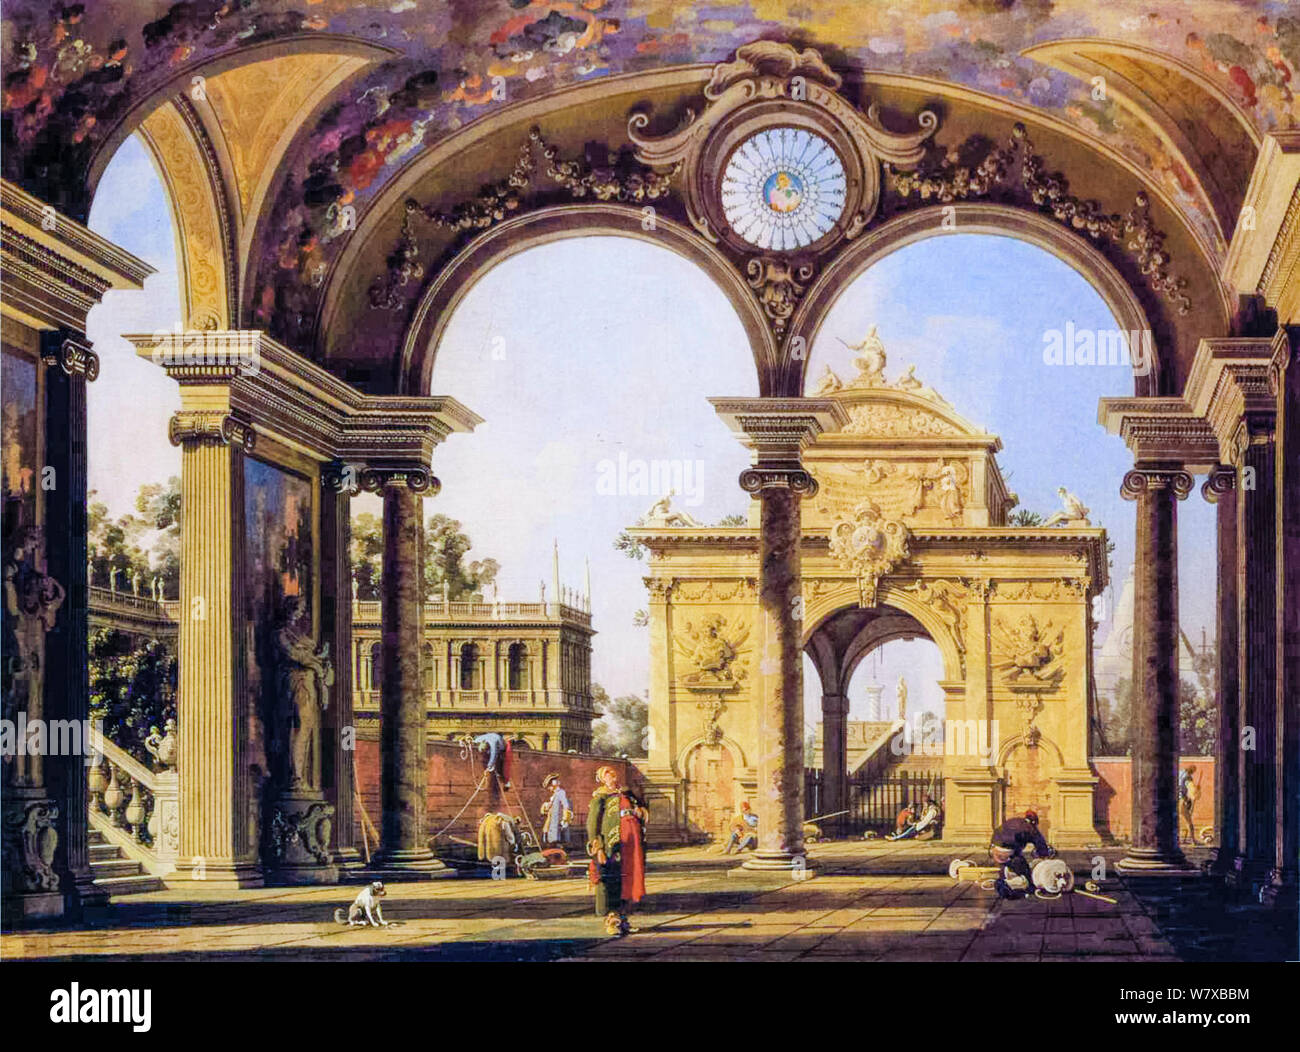 Canaletto, Capriccio of a Renaissance Triumphal Arch seen from the Portico of a Palace, painting, 1753-1755 Stock Photo